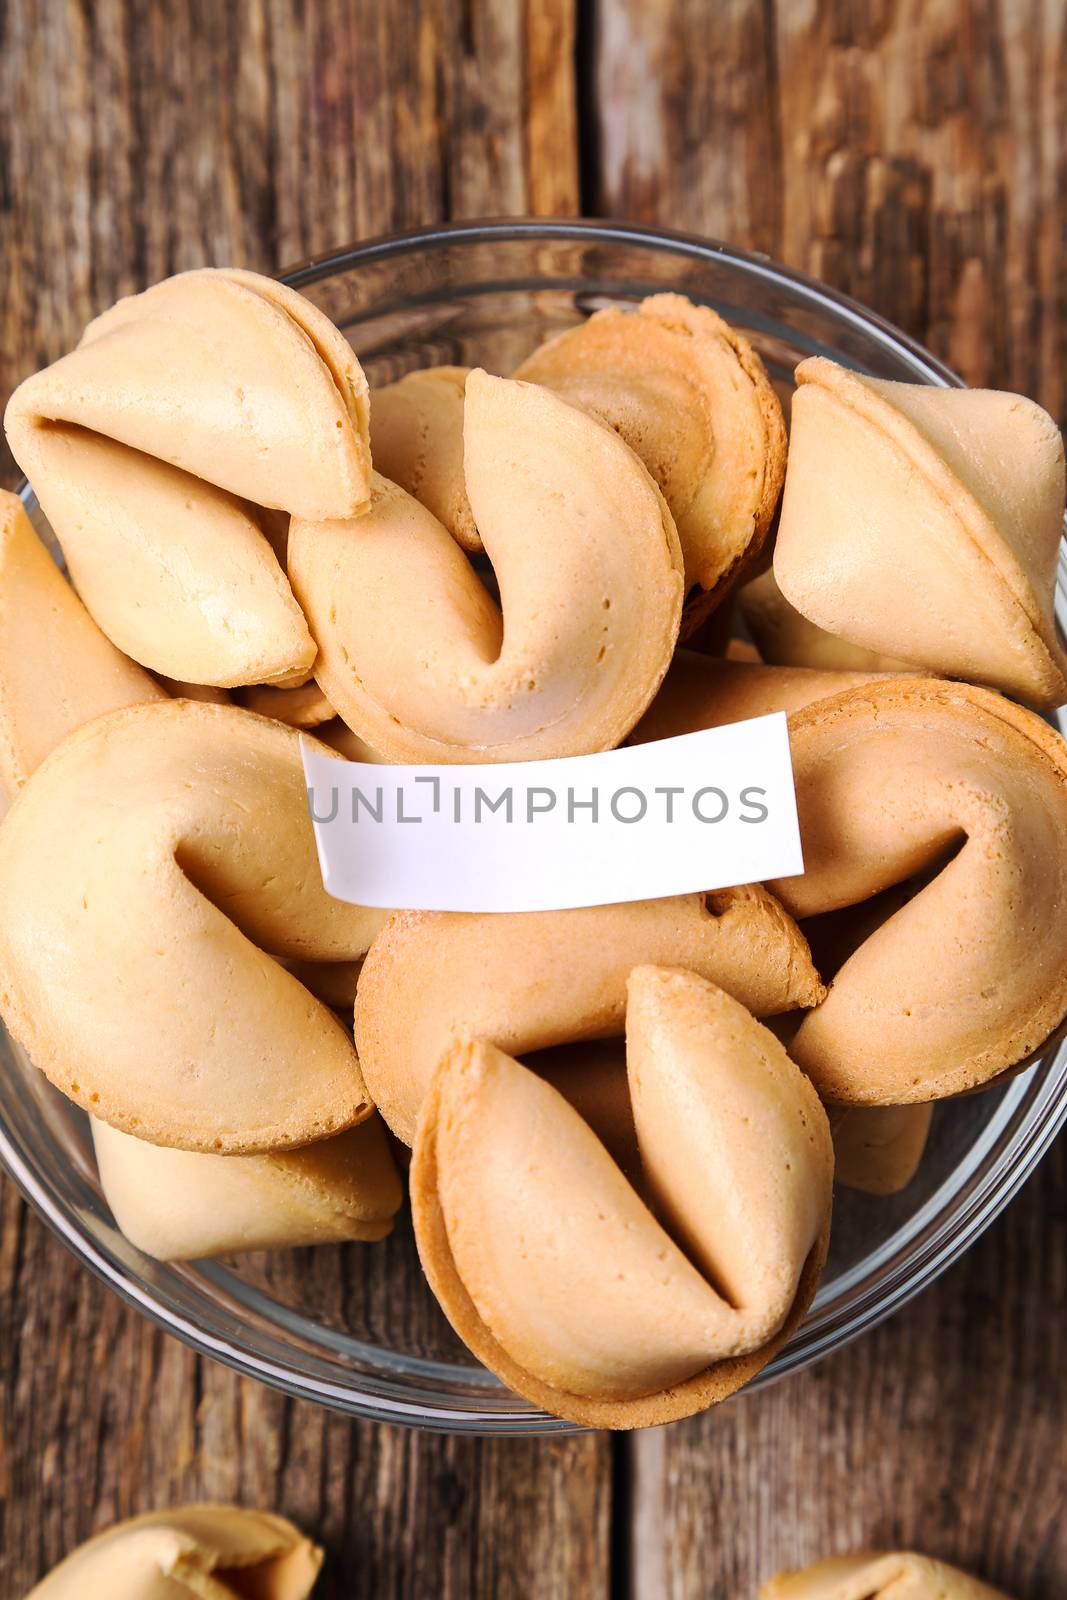 Fortune cookie on the table